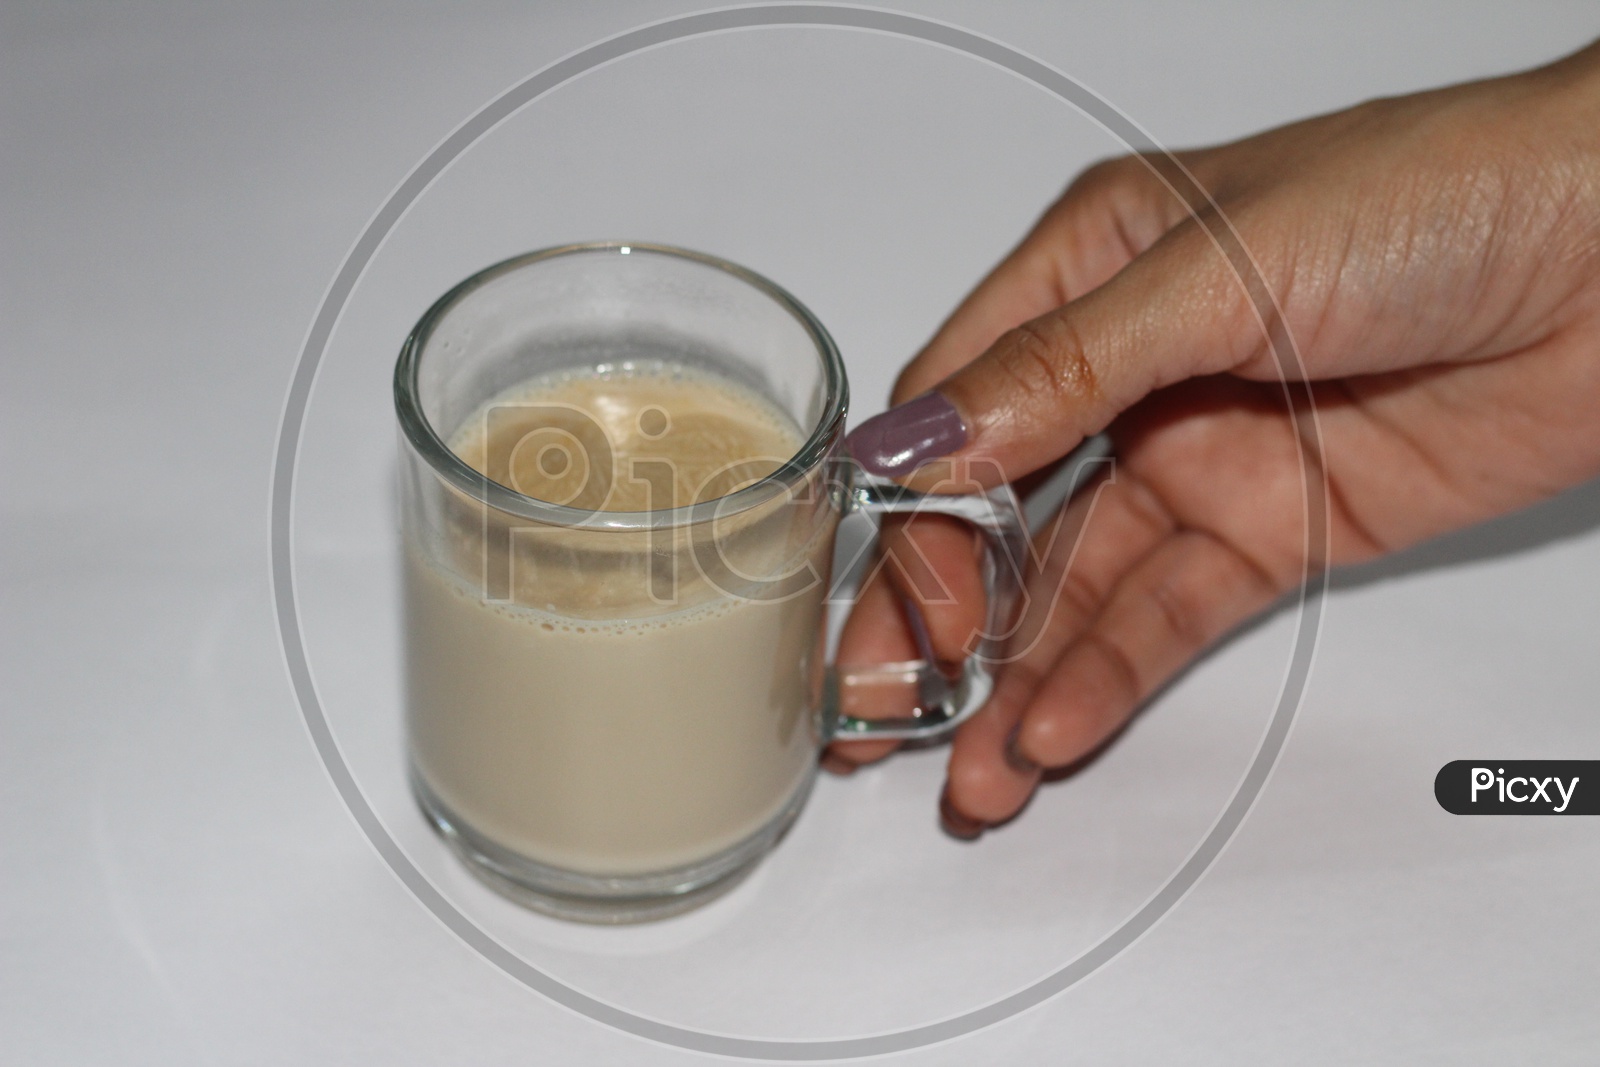 Indian Woman Hand Holding Coffee Or Tea in a Glassware Cup On an isolated White Background